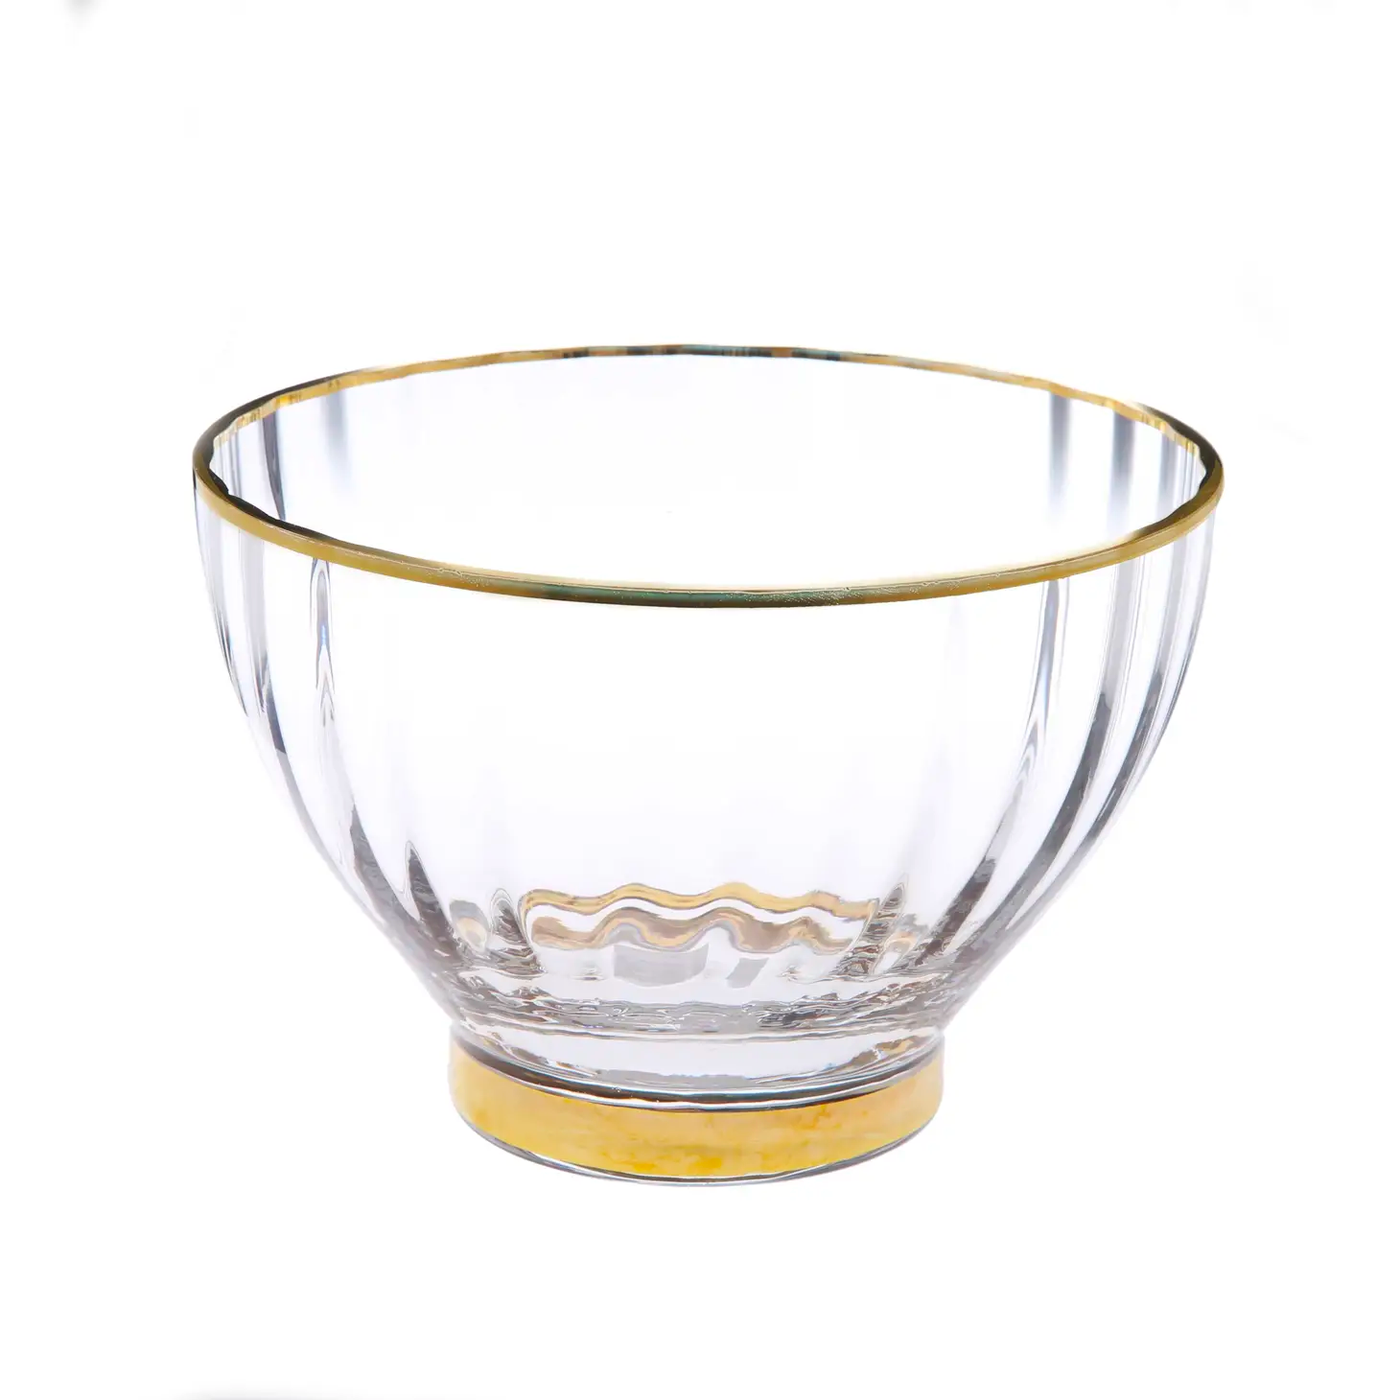 Textured Salad Bowl With Gold Rim and Base - Set With Style